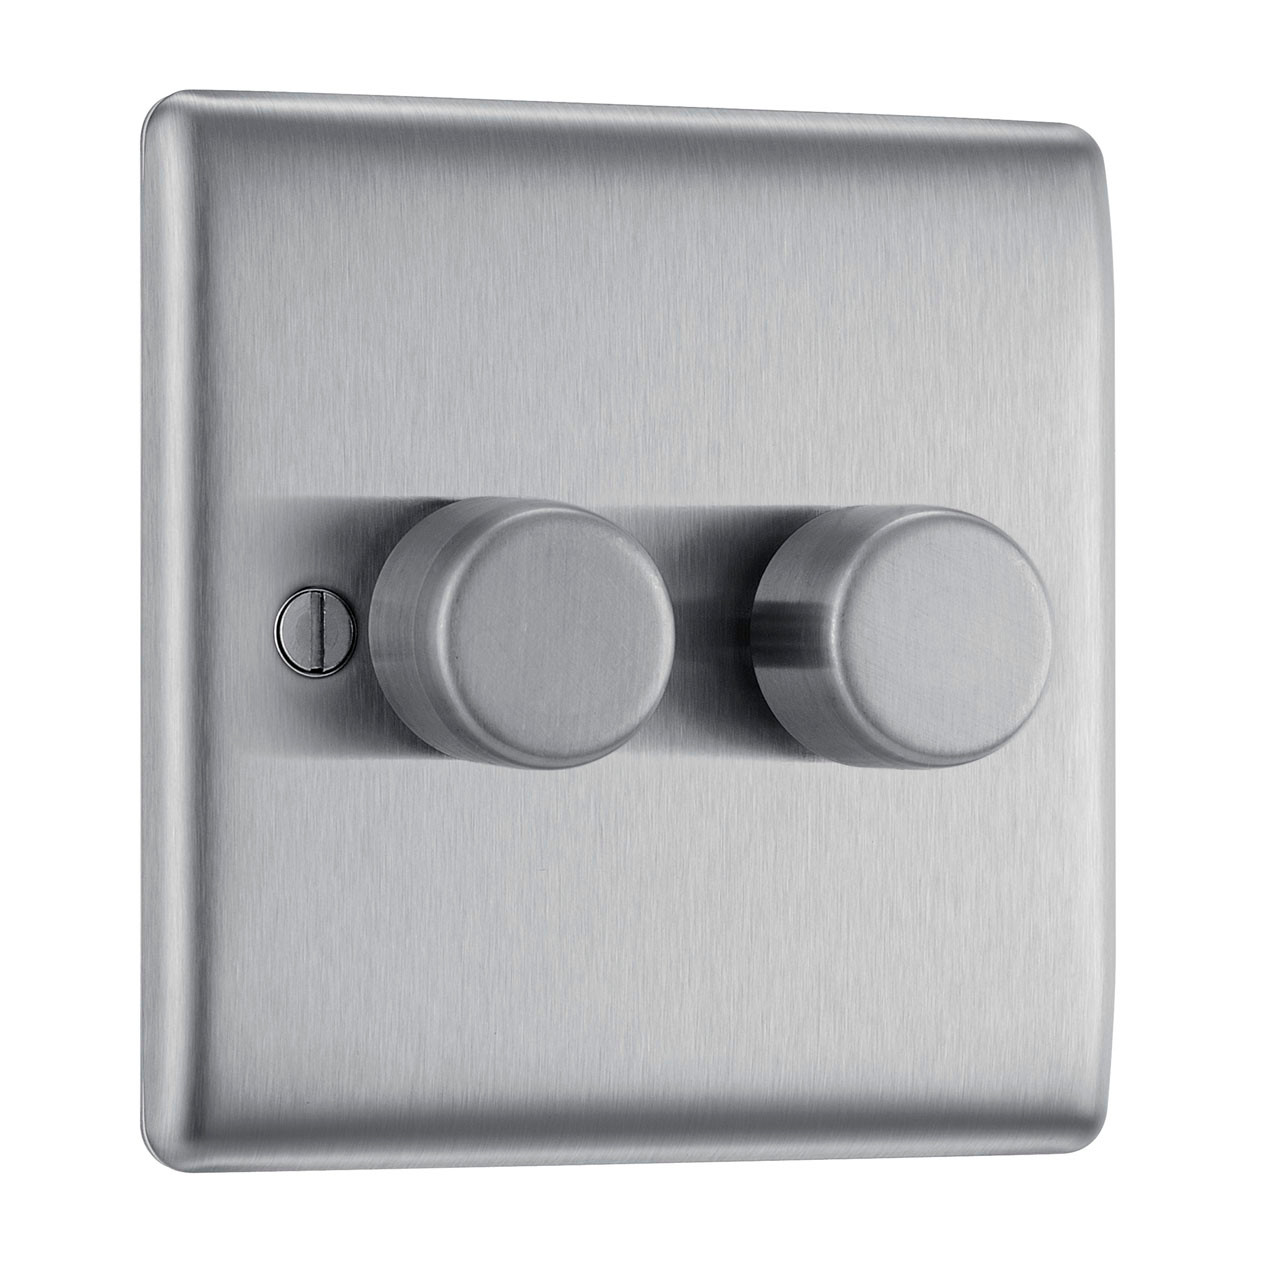 Photograph of BG Electrical Brushed Steel 2 Gang 2 Way Dimmer Switch